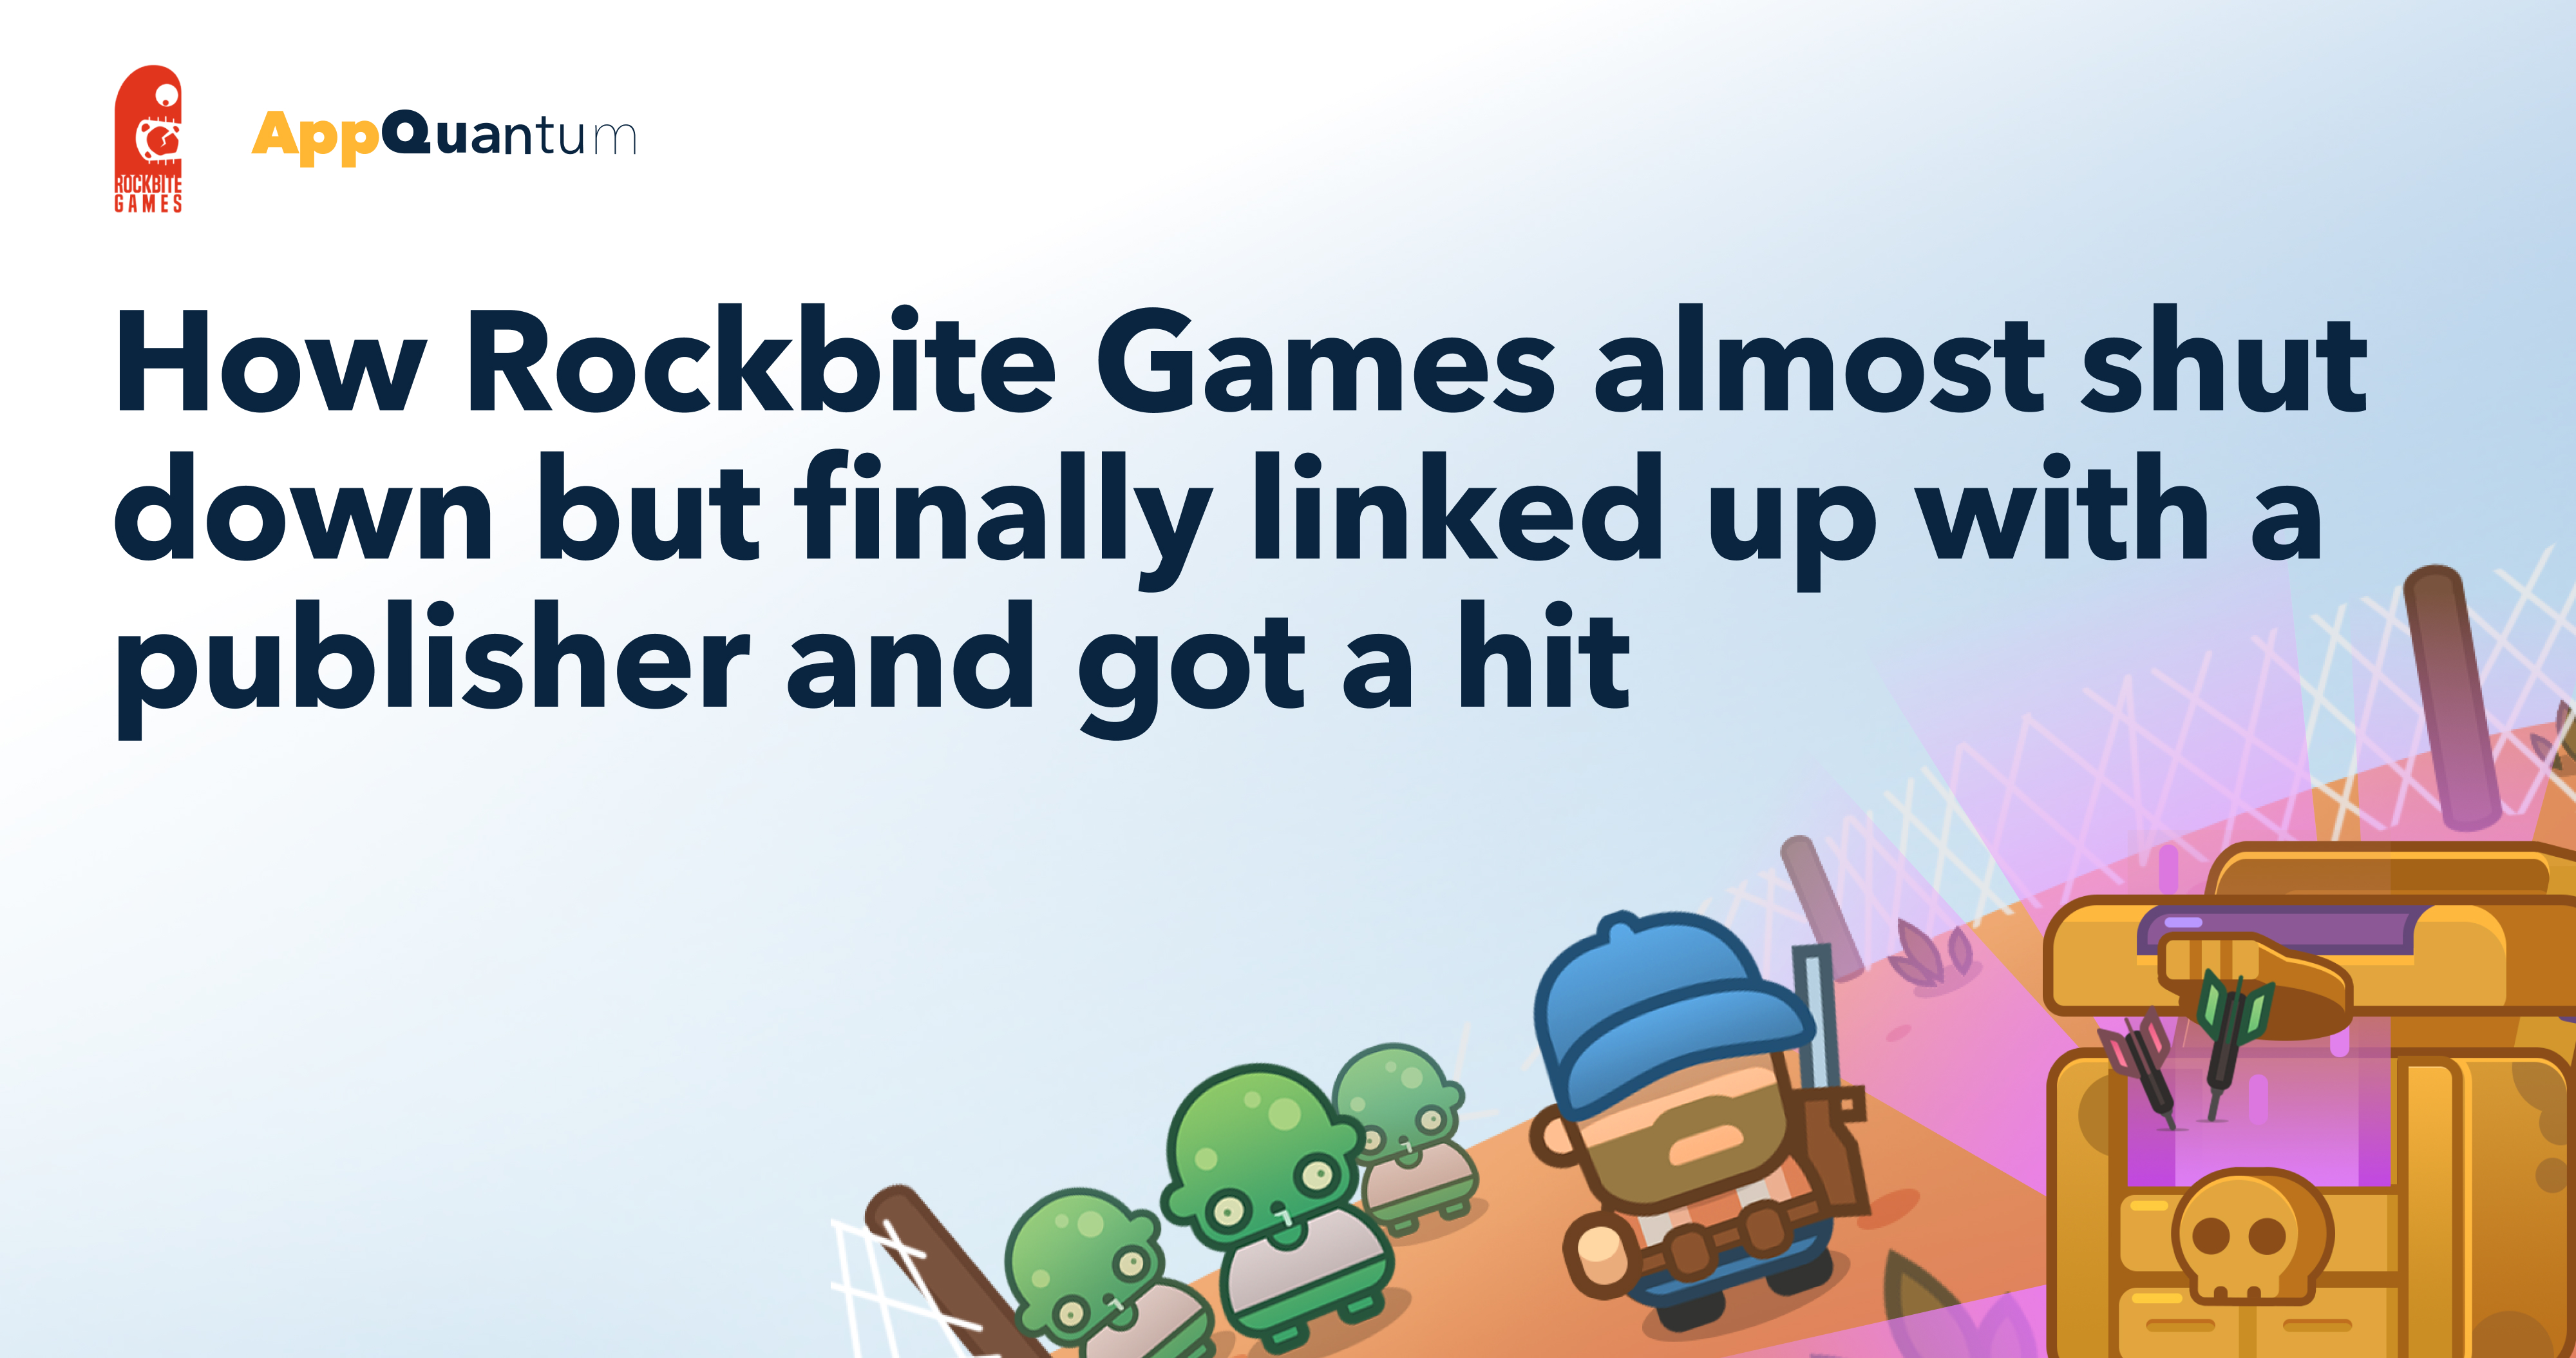 How Rockbite Games Almost Shut Down but Finally Linked Up With a Publisher and Got a Hit